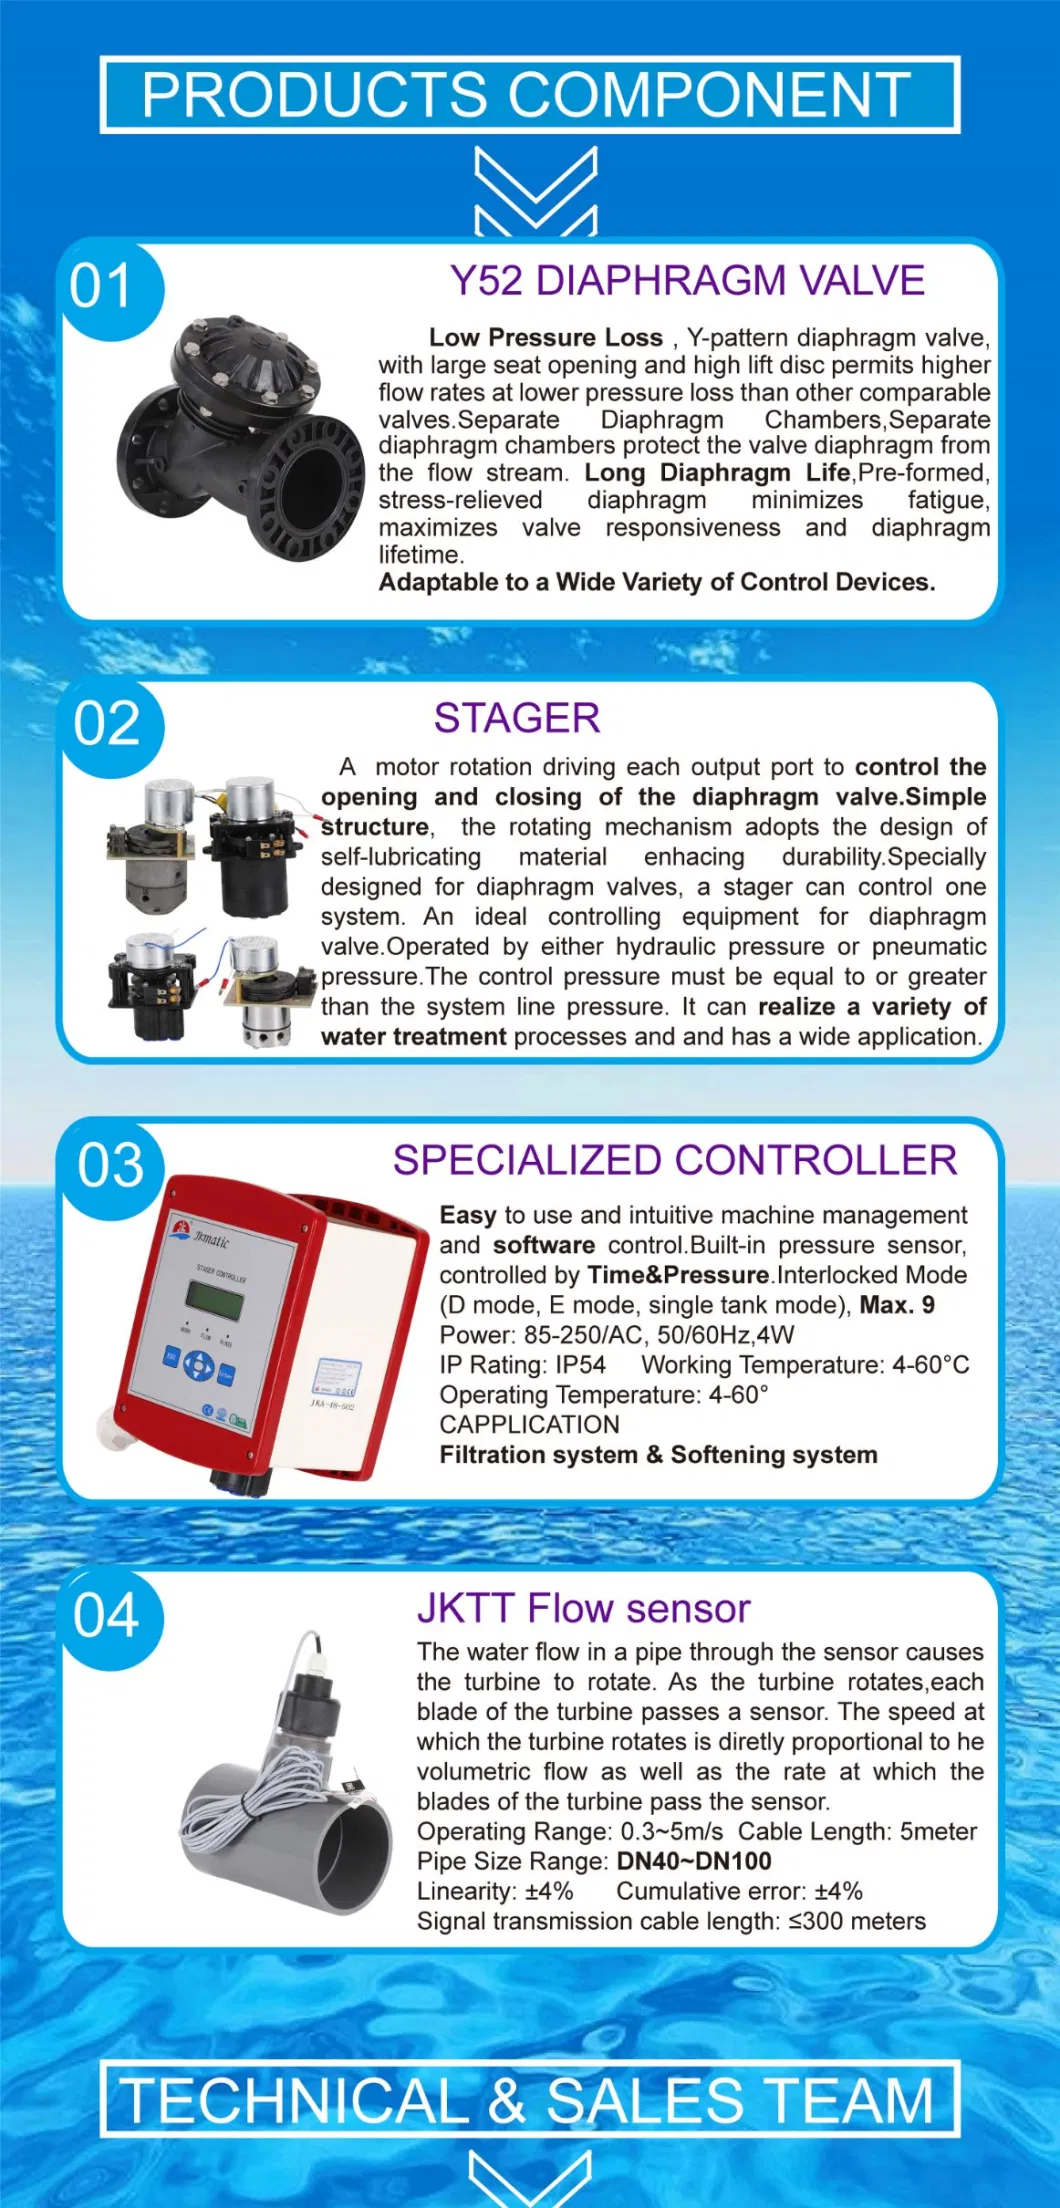 Jkmatic Resin Exchange/Multimedia Water Filter and Softener Treatment Equipment/Silica Sand/Active Carbon/Sand Filter /Save up to 50% Water and 30% Salt